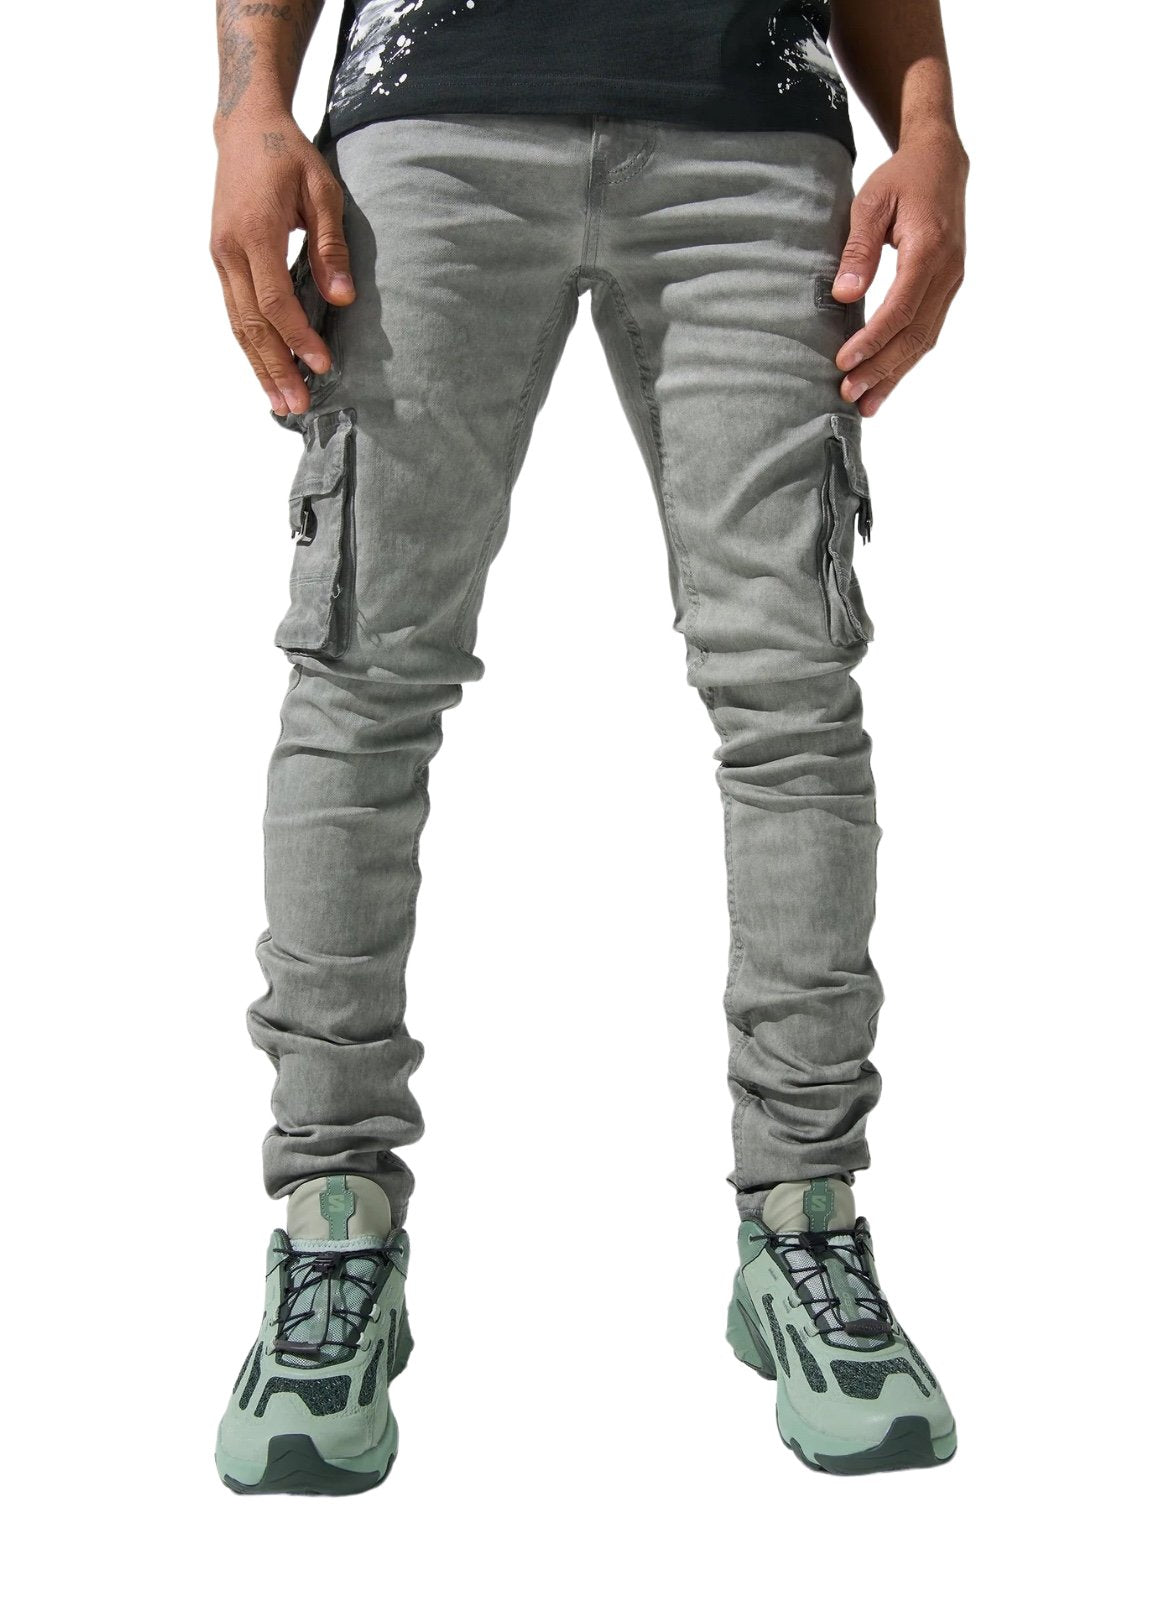 A man wearing grey SERENEDE TIMBER WOLF ARTIC GREY cargo pants and green sneakers, showcasing the lower half of his body on a white background.